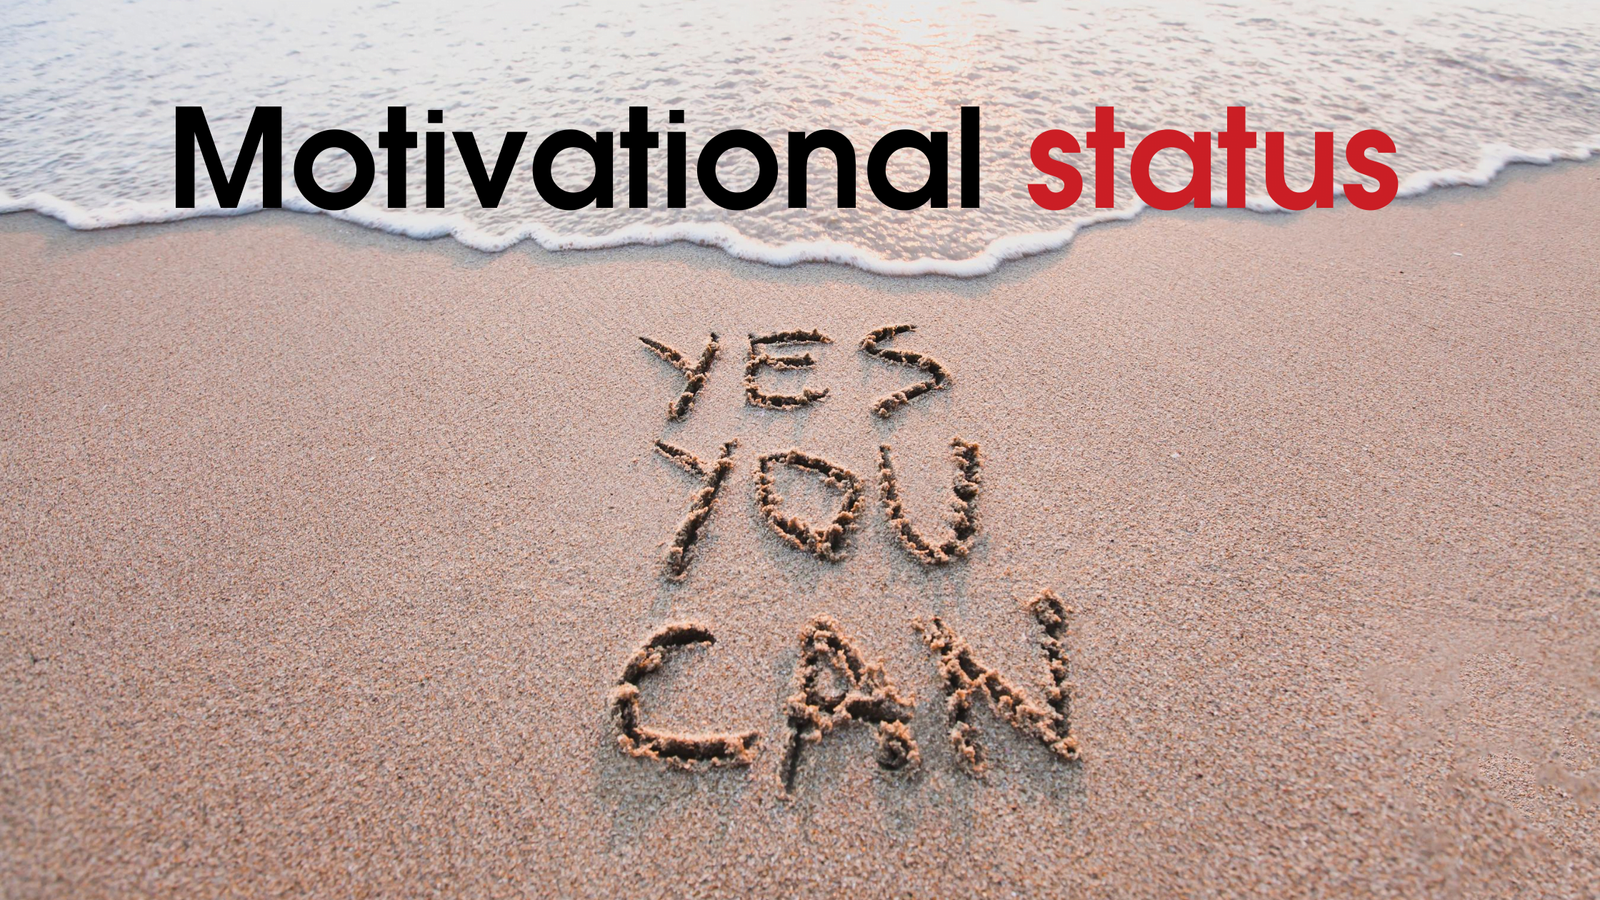 these Motivational status will enlighten your day!